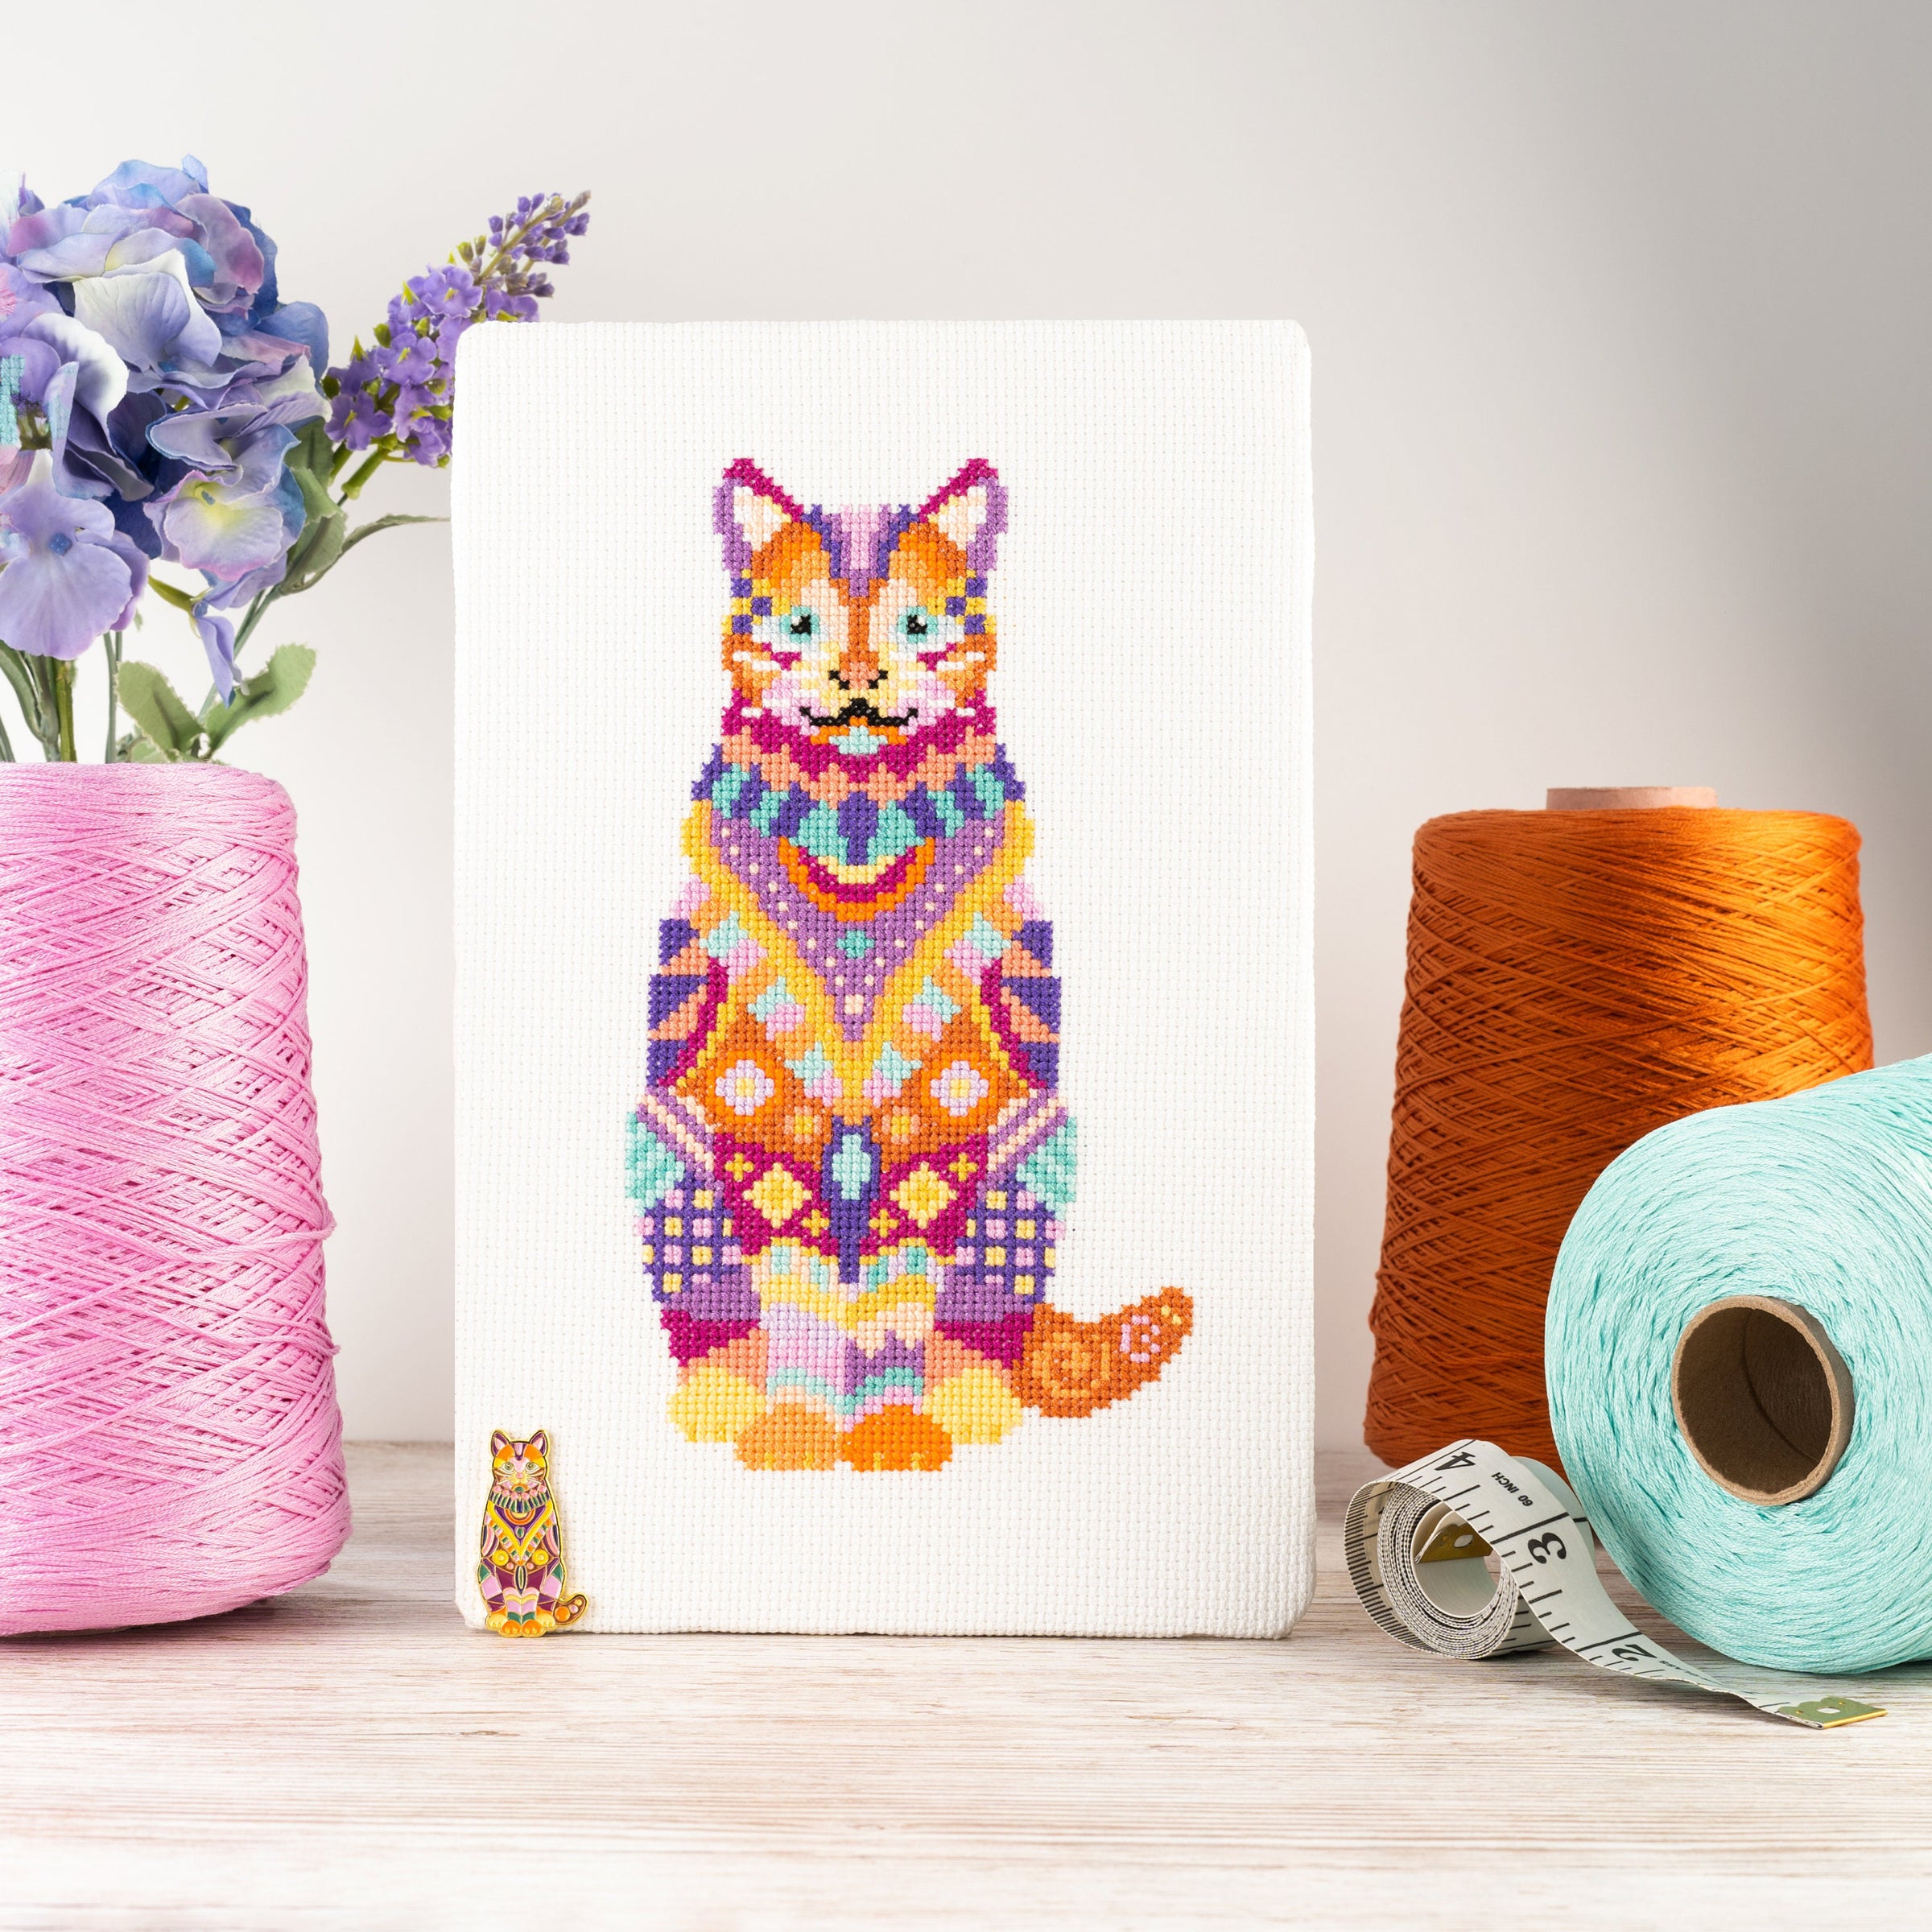 Floral Cat Bookmarks Counted Cross Stitch Kit - Needlework Projects, Tools  & Accessories